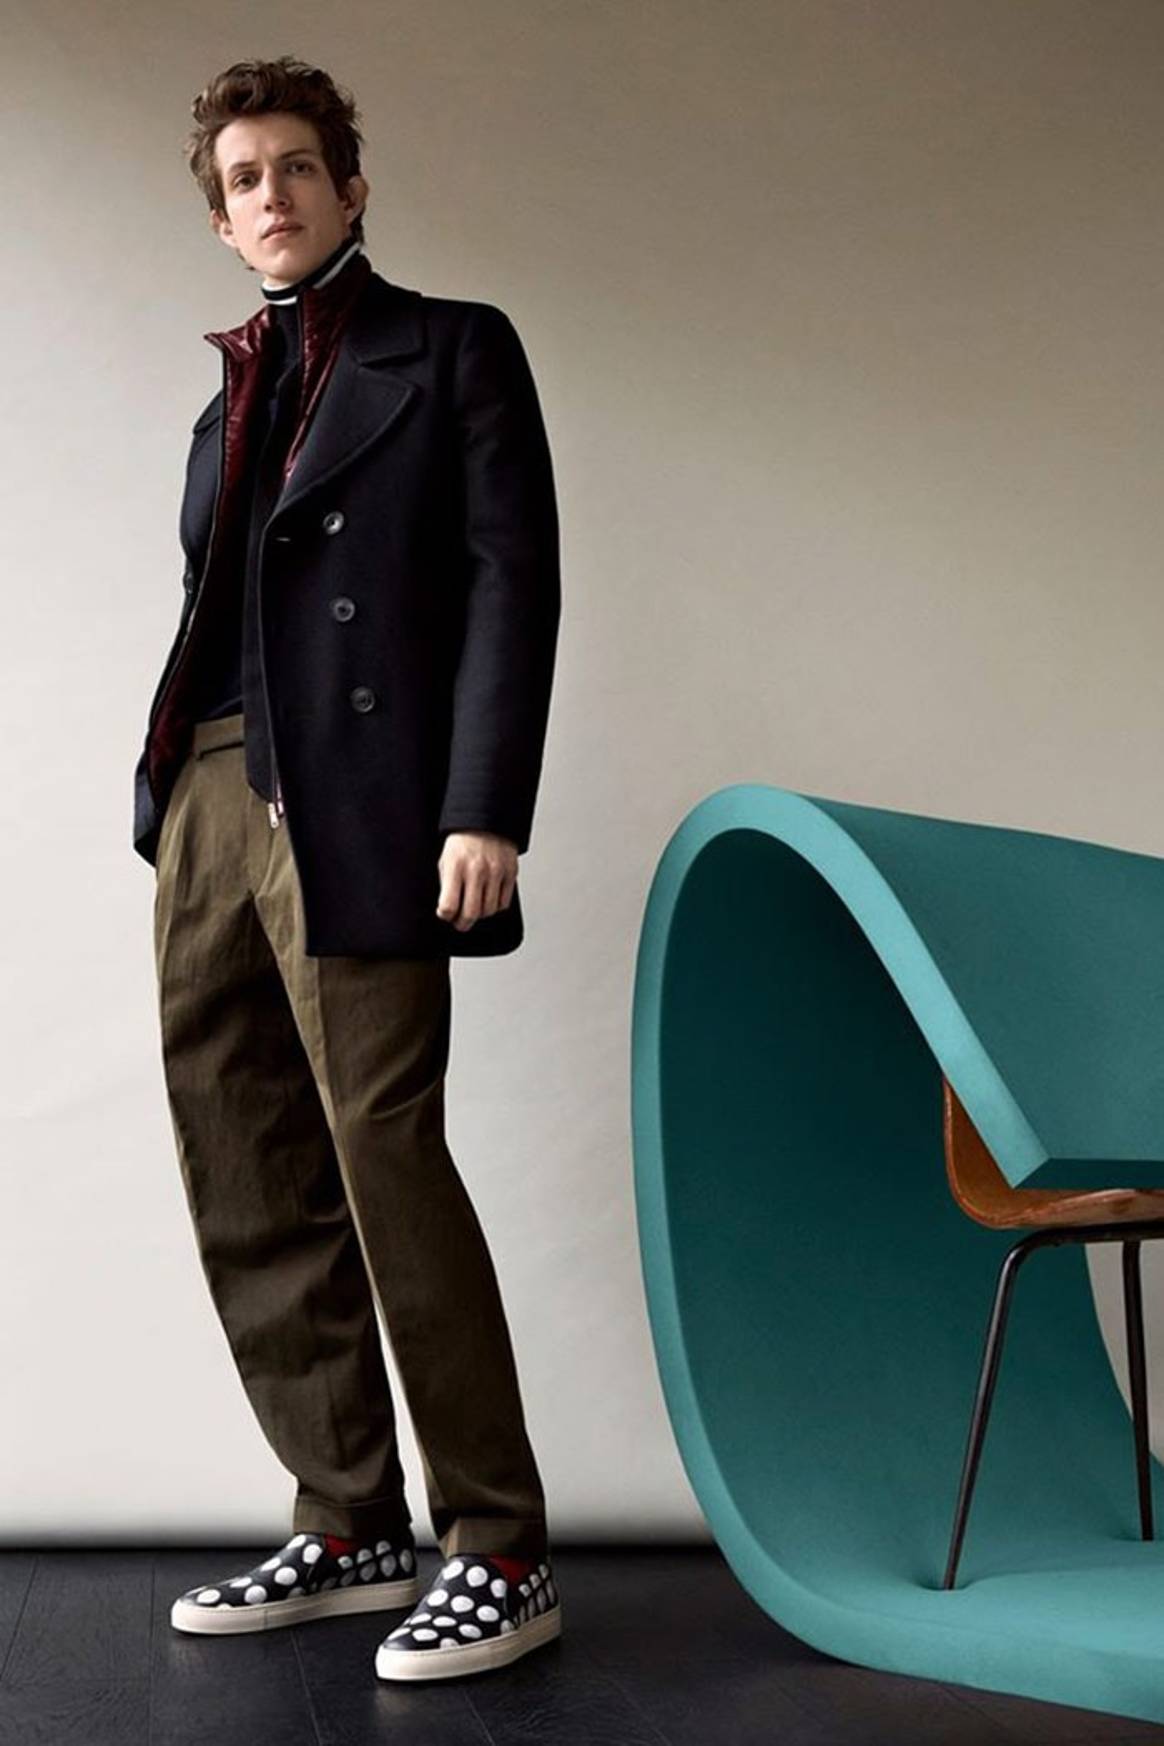 Paul Smith to merge women’s and men’s shows next January